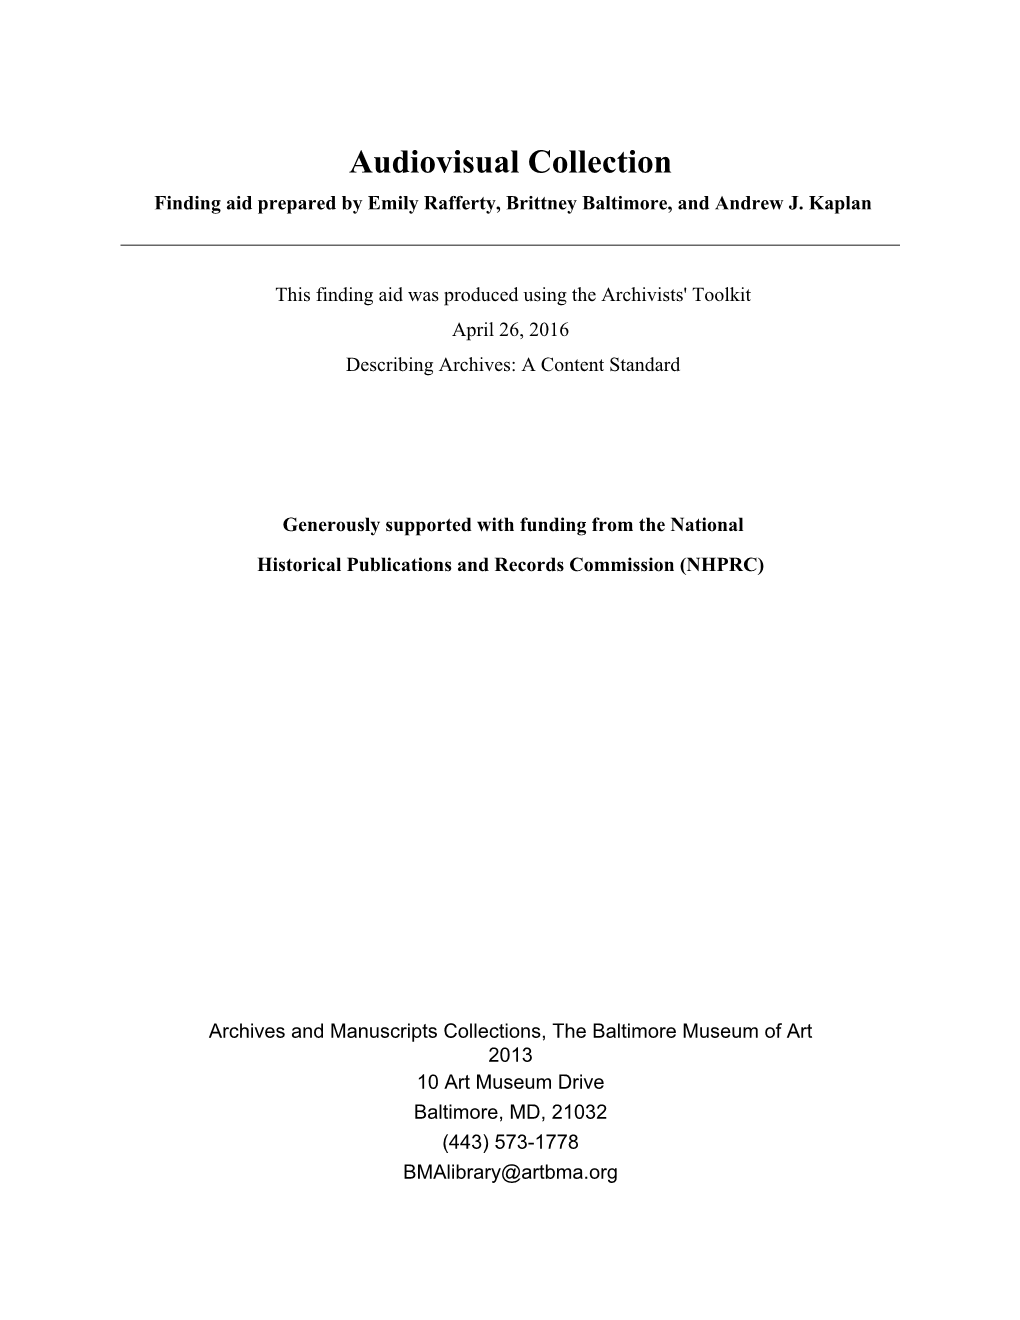 Audiovisual Collection Finding Aid Prepared by Emily Rafferty, Brittney Baltimore, and Andrew J